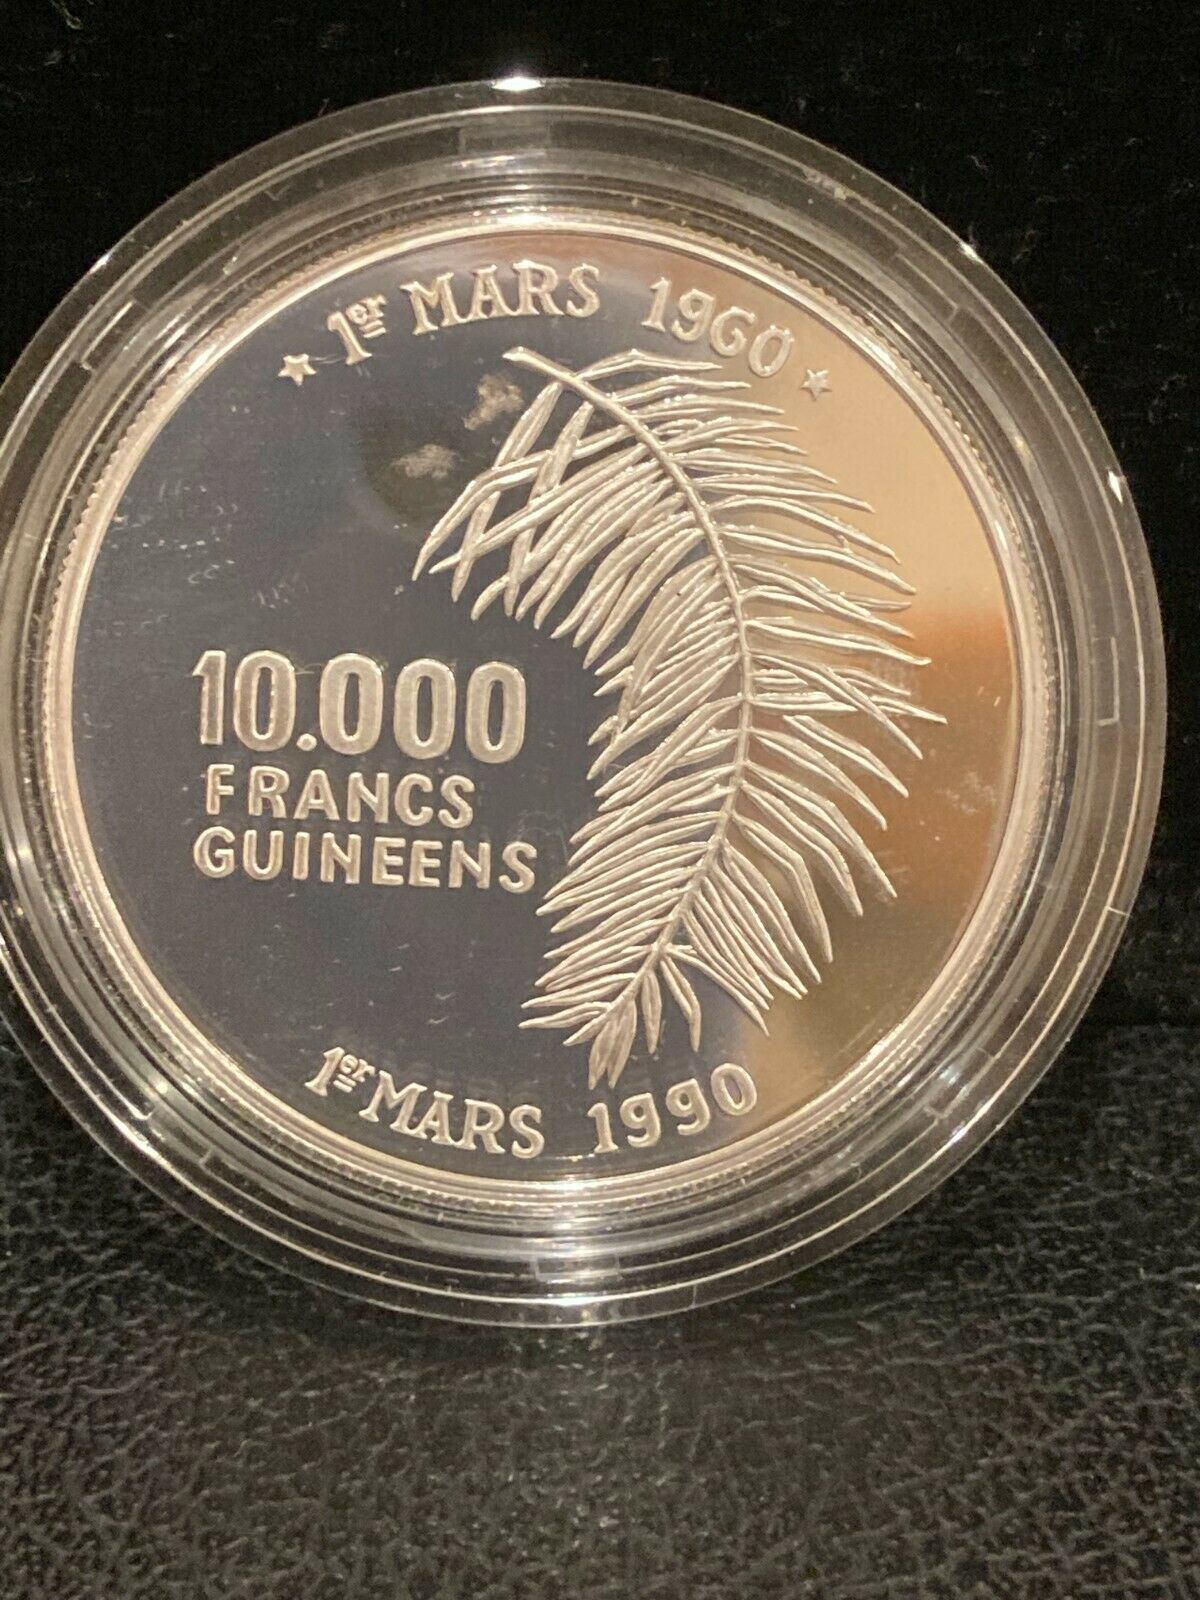 1960 Guinea 10,000 Francs .999 Silver Proof Coin - Low Mintage